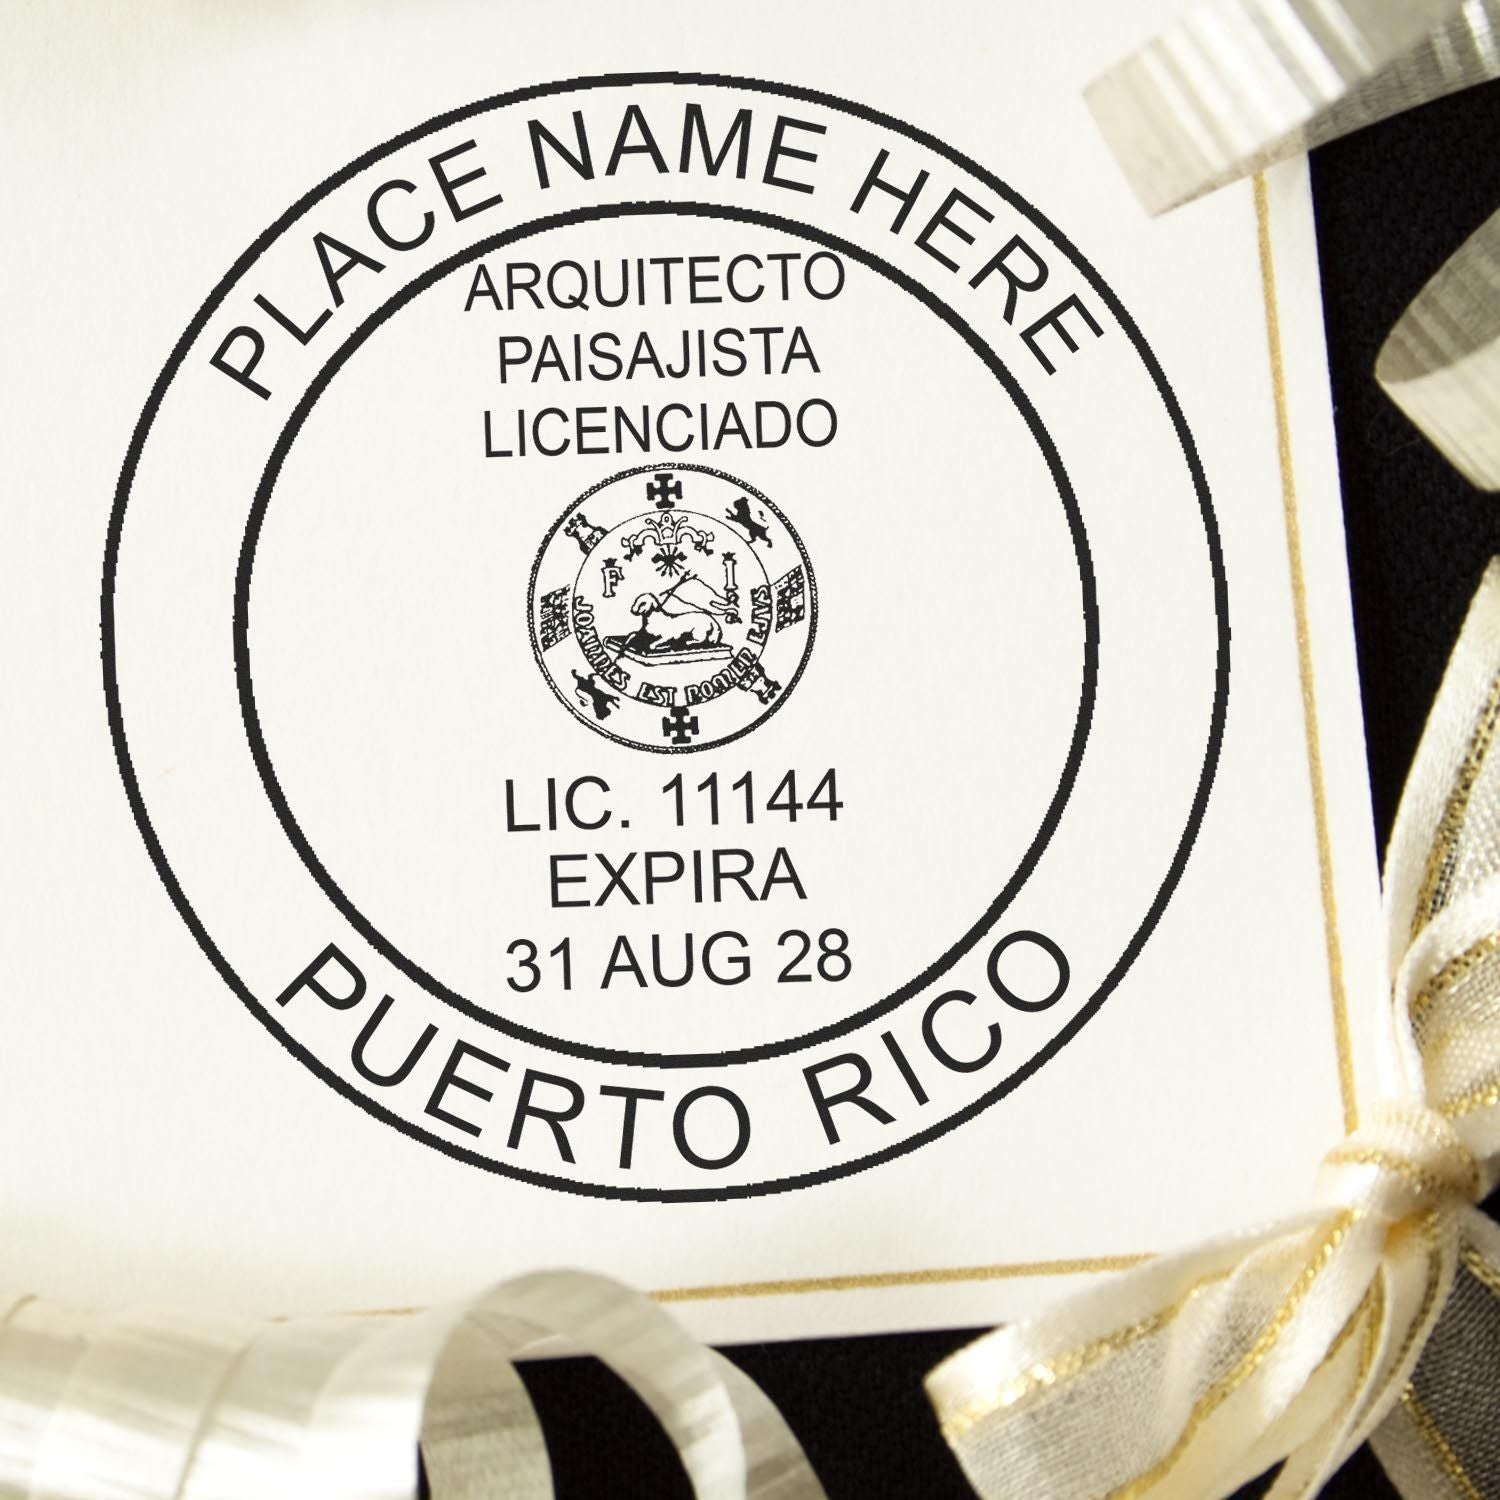 A stamped impression of the Self-Inking Puerto Rico Landscape Architect Stamp in this stylish lifestyle photo, setting the tone for a unique and personalized product.